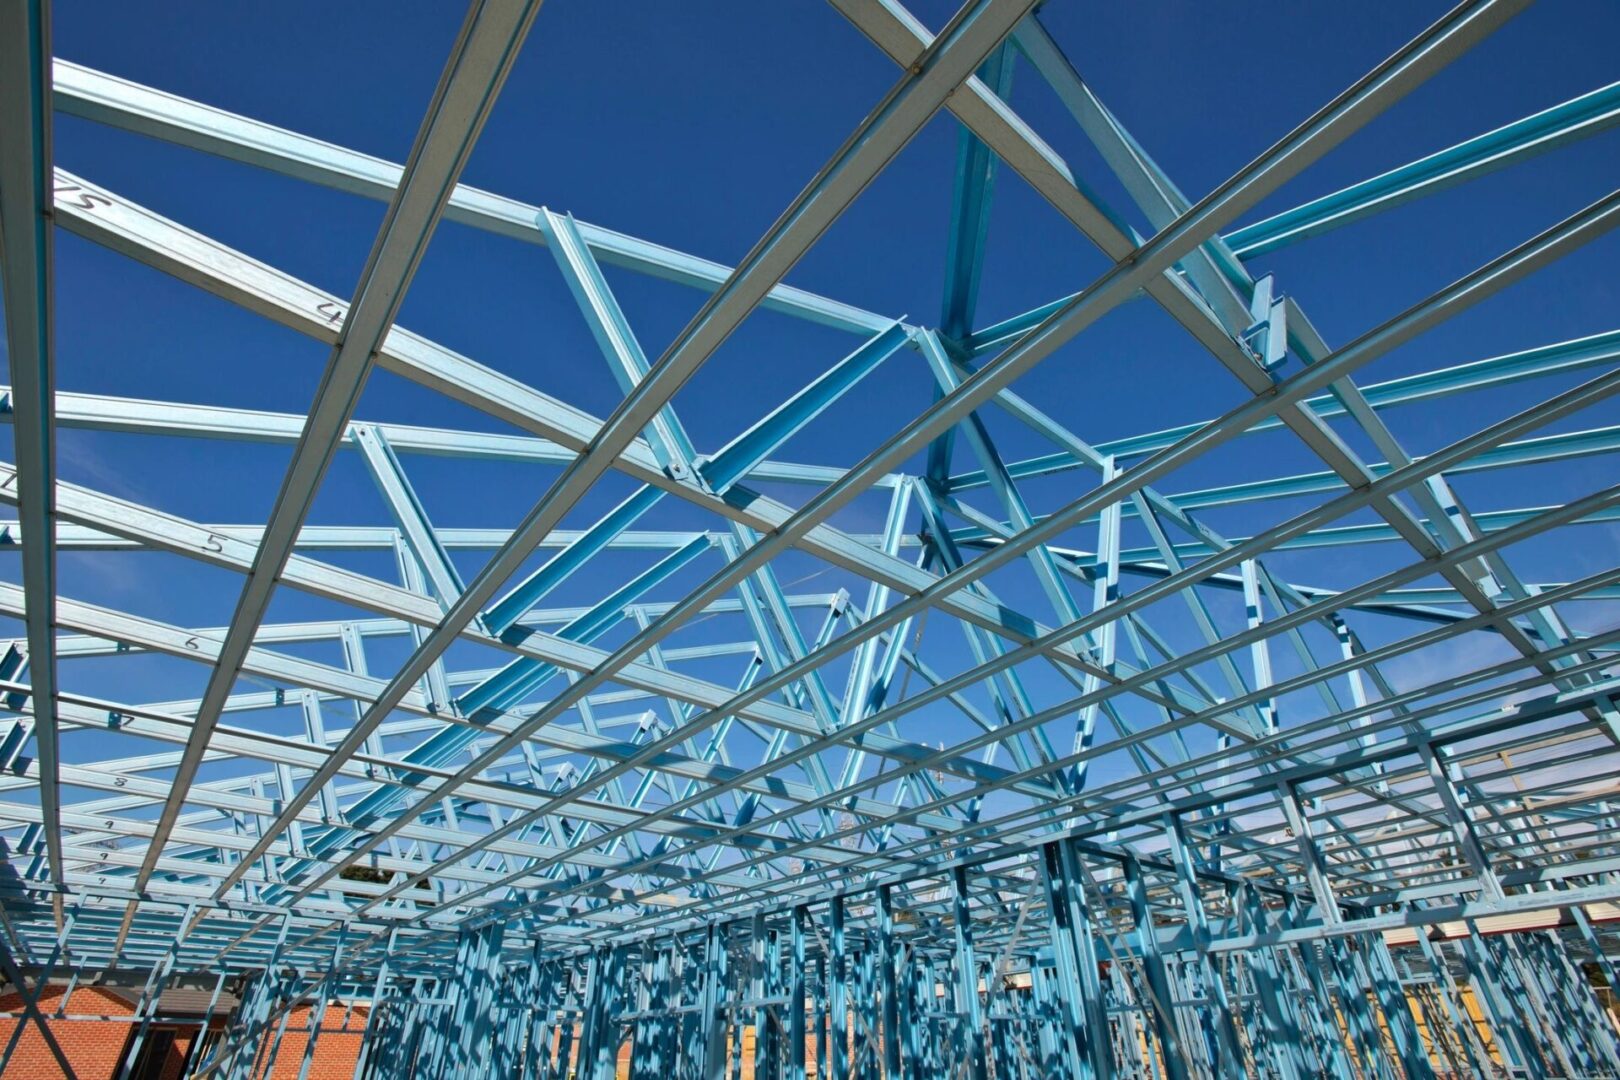 A blue metal structure with many blue ribbons hanging from it.